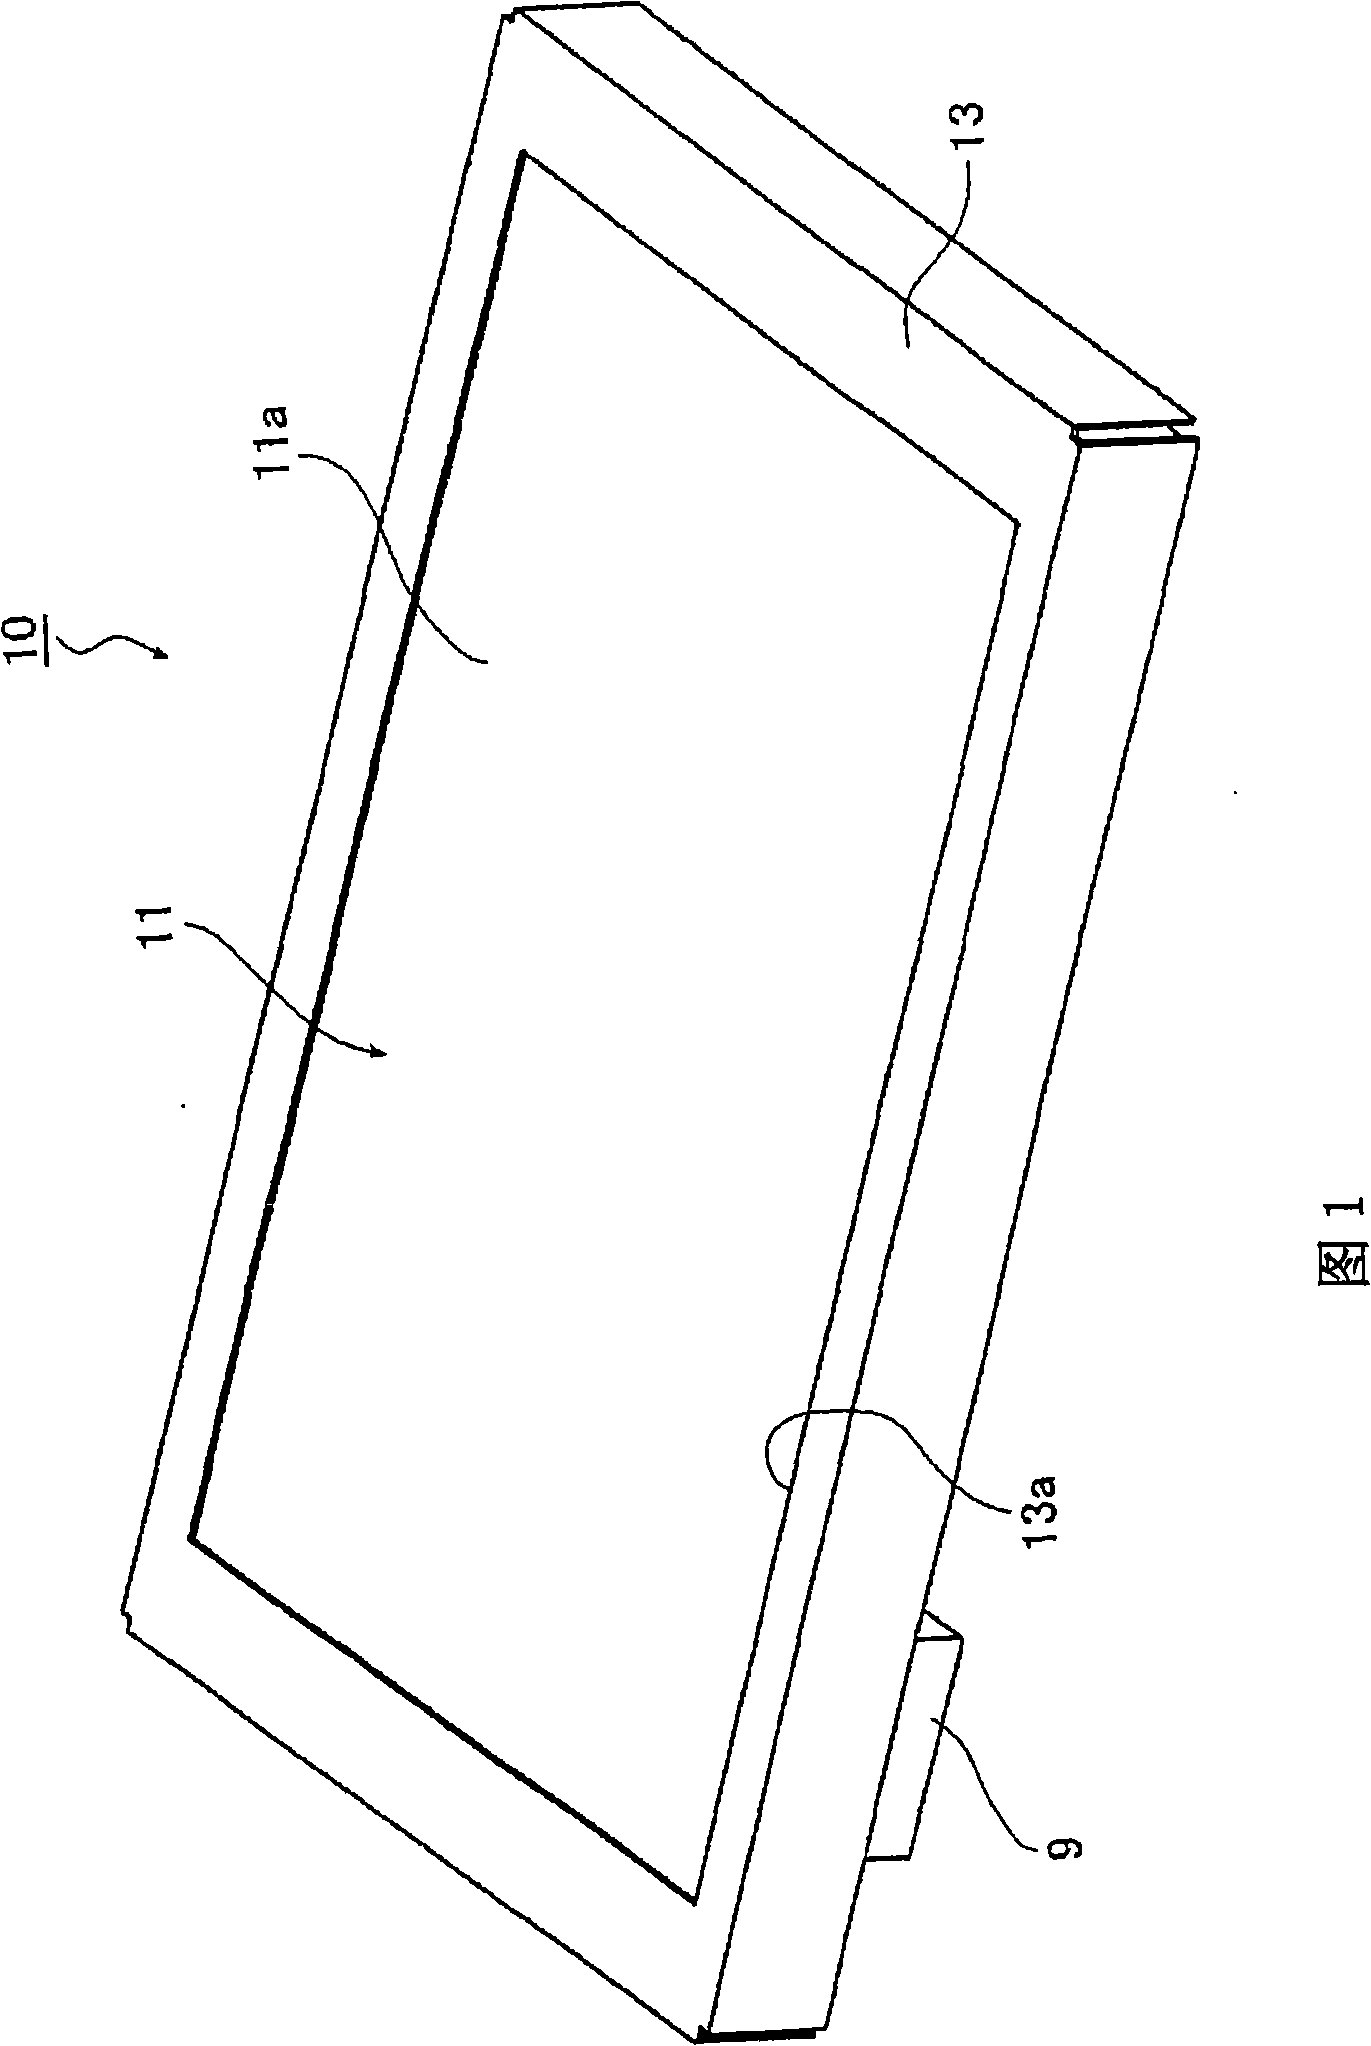 Unit light guide plate, light guide plate unit, planar illuminating device and liquid crystal display device